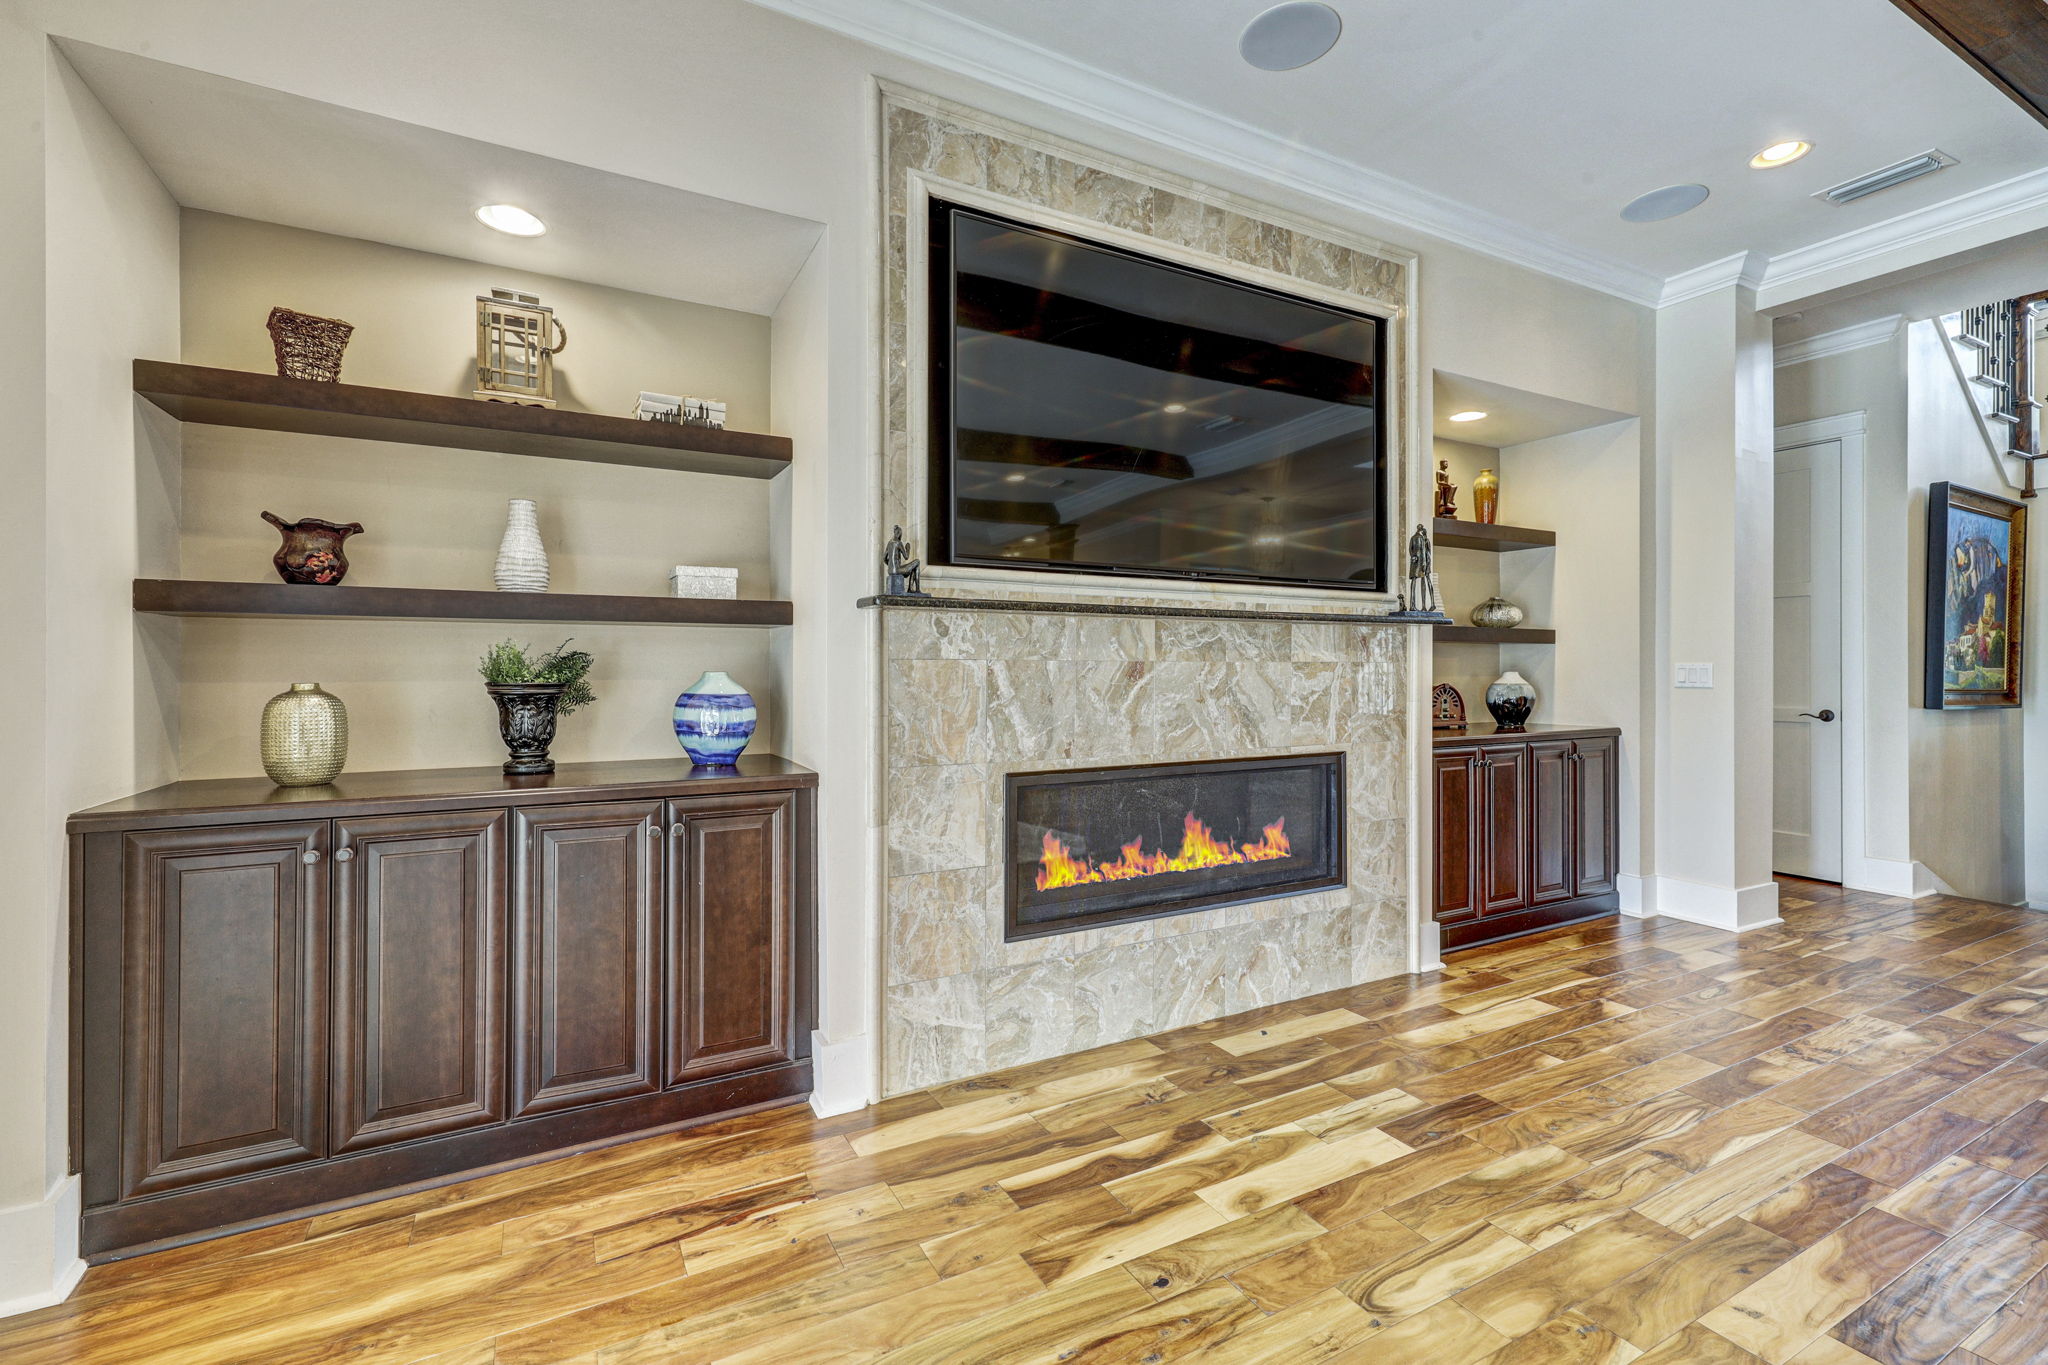 Gas Fireplace & Wood Built ins